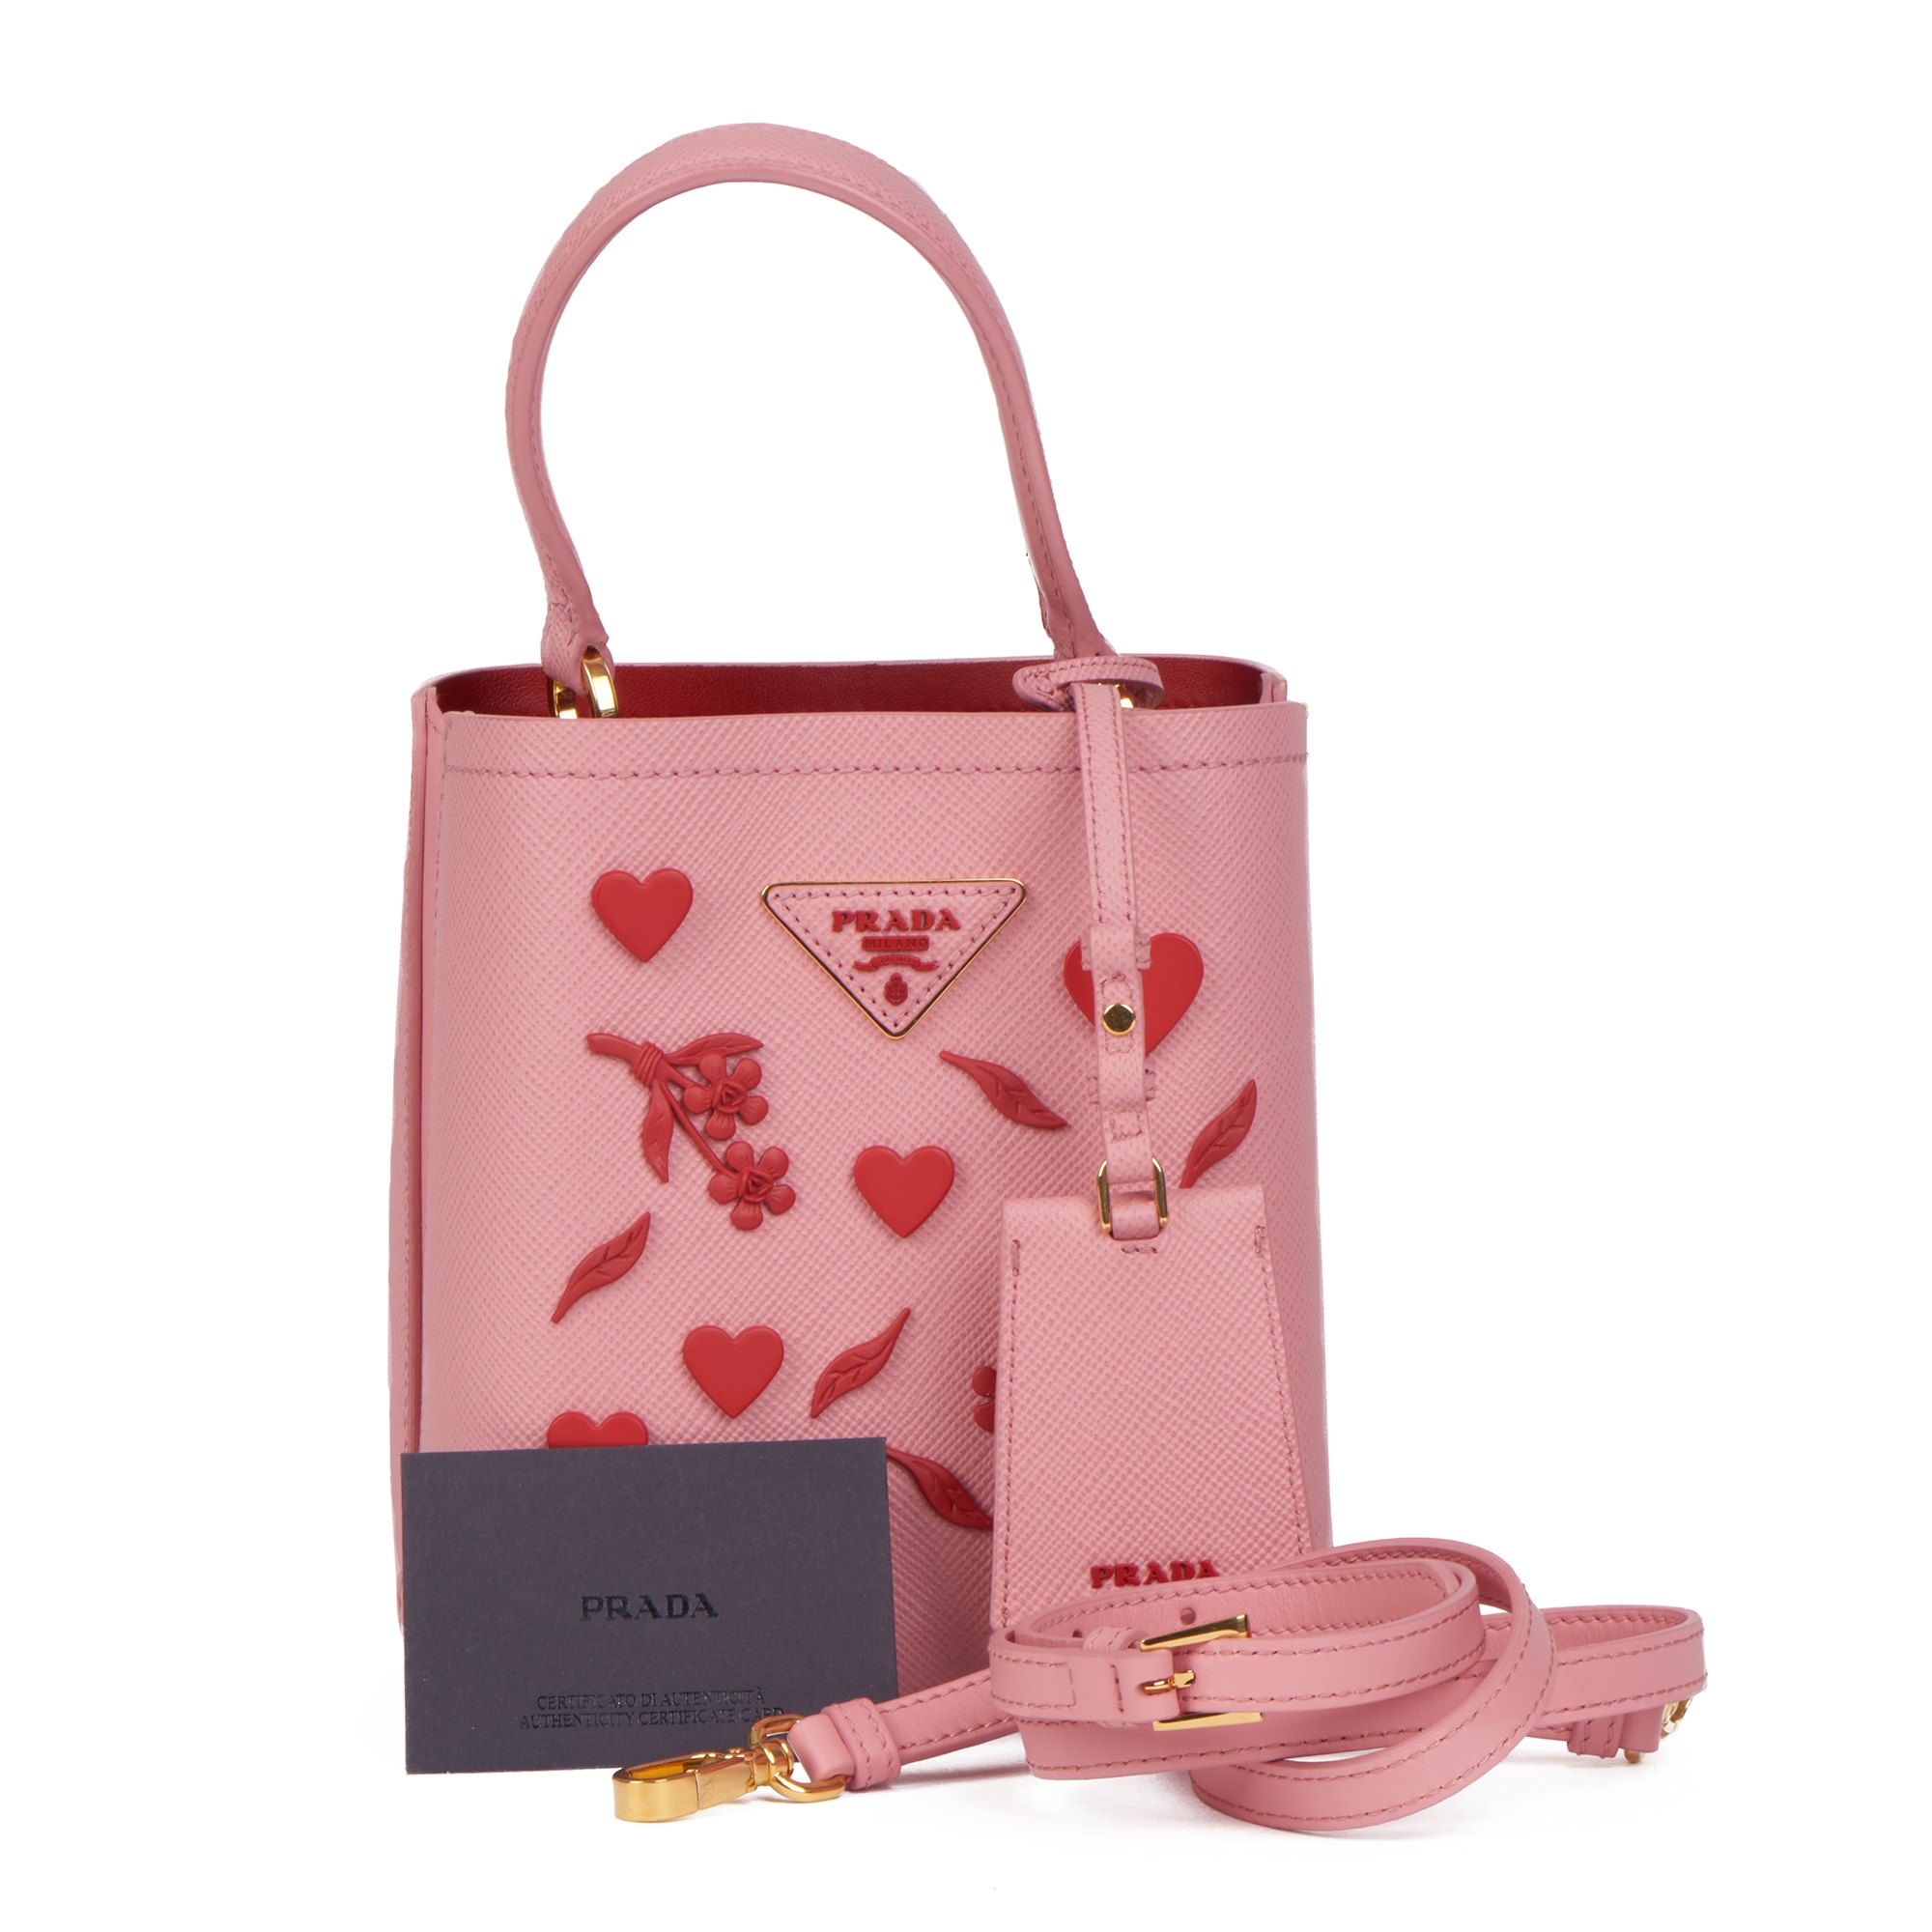 Prada Petal Pink Saffiano Leather & Fiery Red Rubber Embellished Small Panier